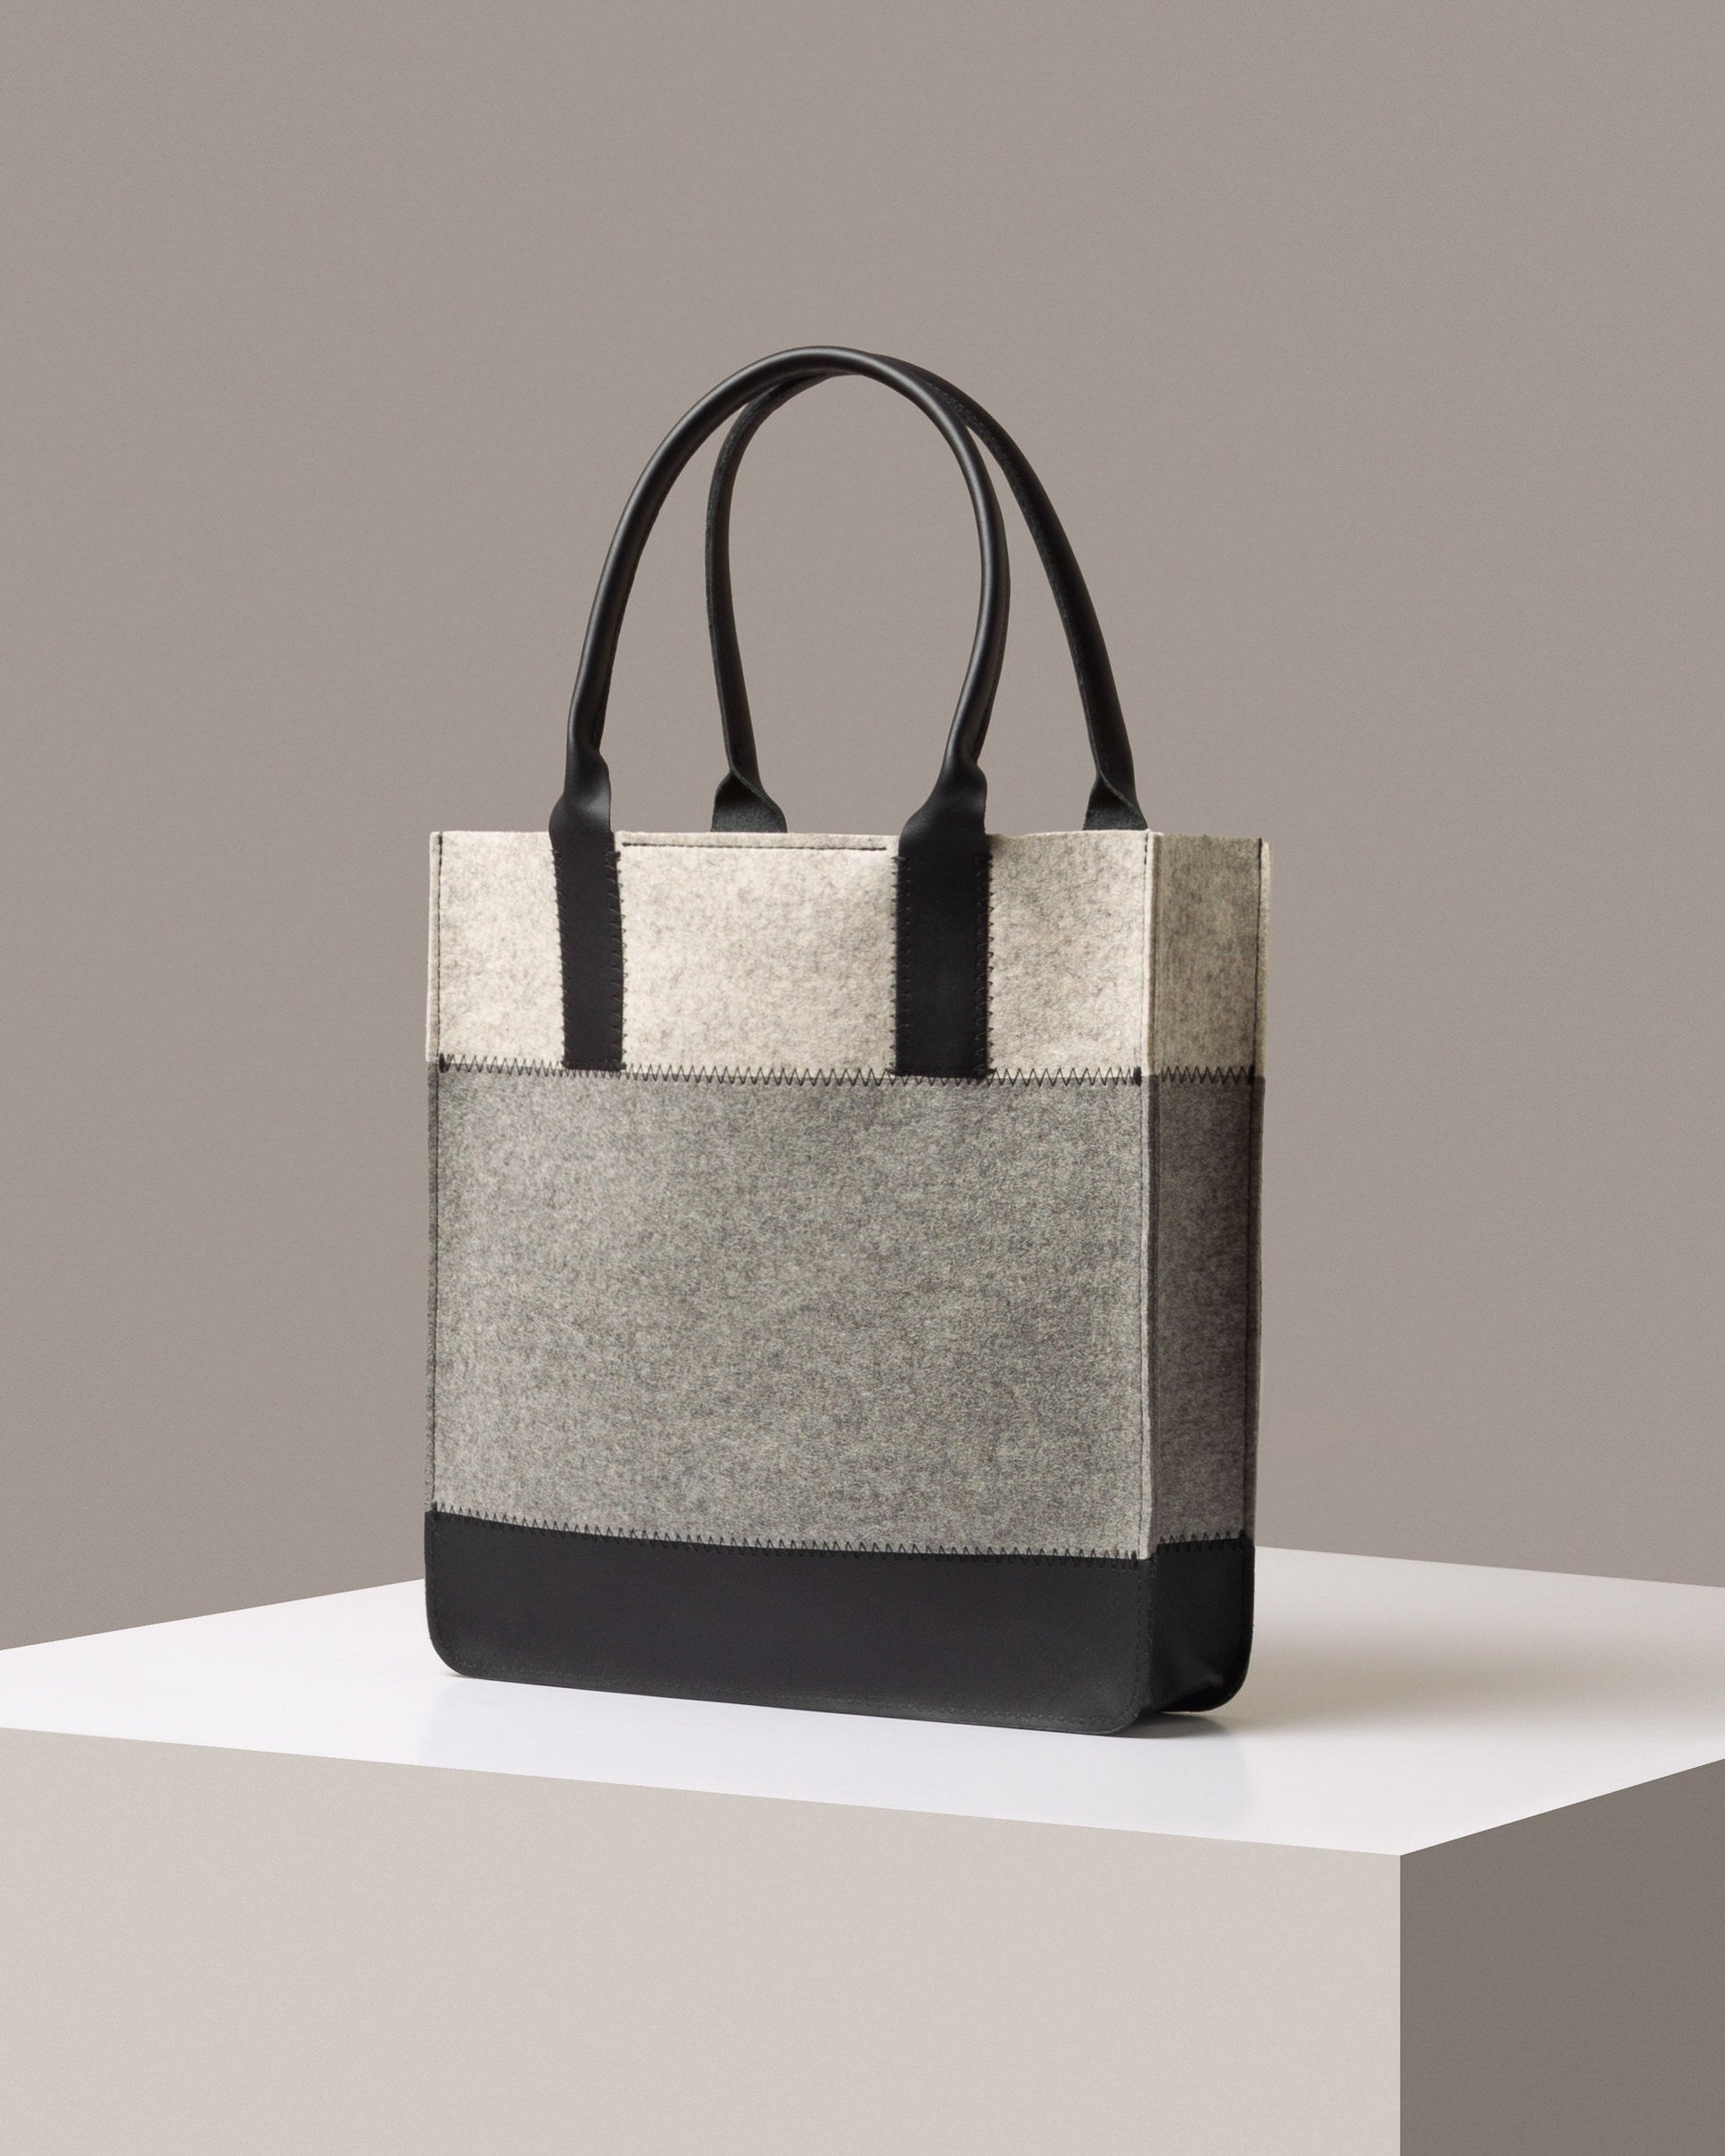 A stylish Jaunt Merino Wool Felt Tote bag in gray, white, and black colors, displayed in a three-quarter view on a white base